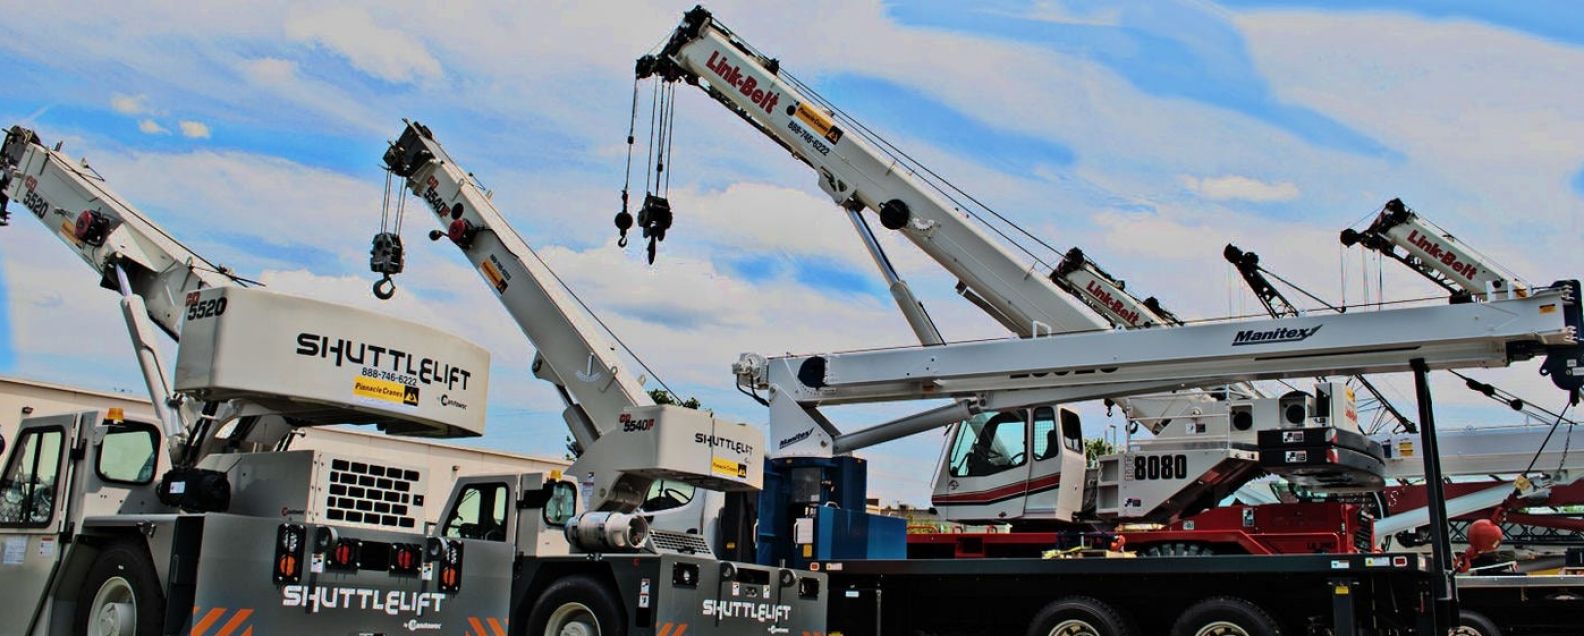 Fleet of cranes and lifts for purchase or rental